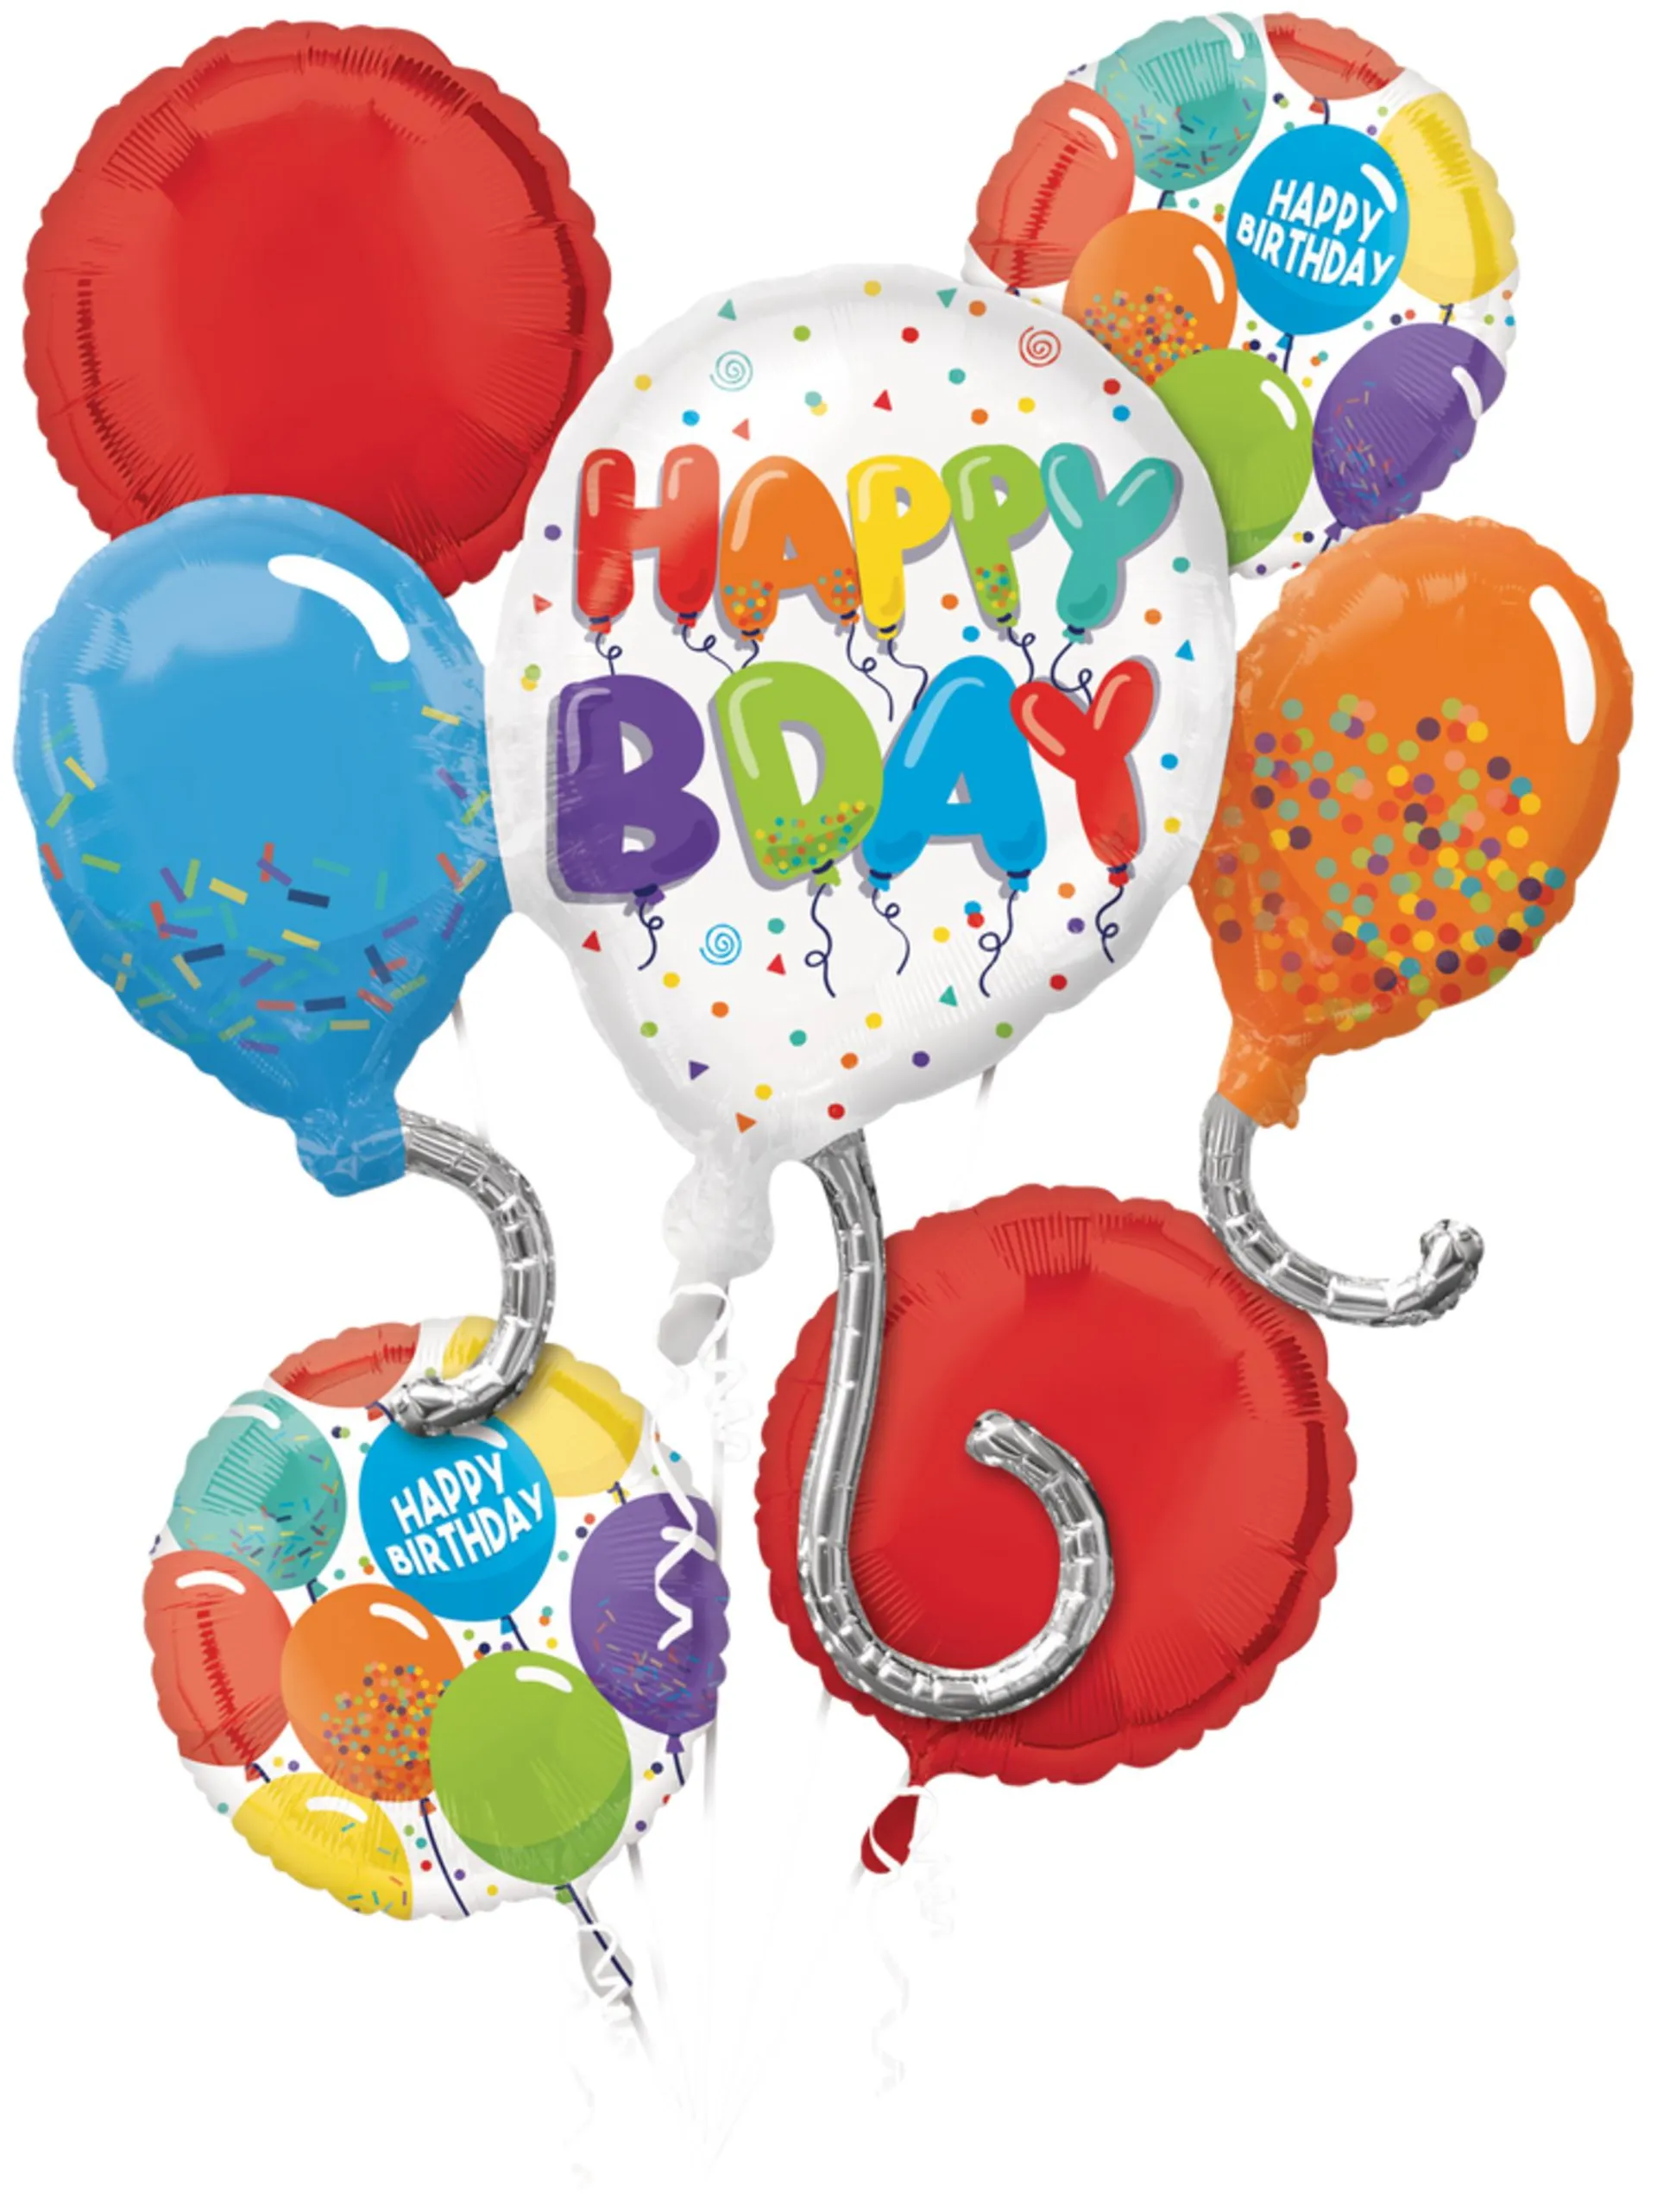 "Happy Birthday" Round Satin Foil Balloon Bouquet, Multi-Coloured, Confetti, 5-pk, Helium Inflation & Ribbon Included for Birthday Party